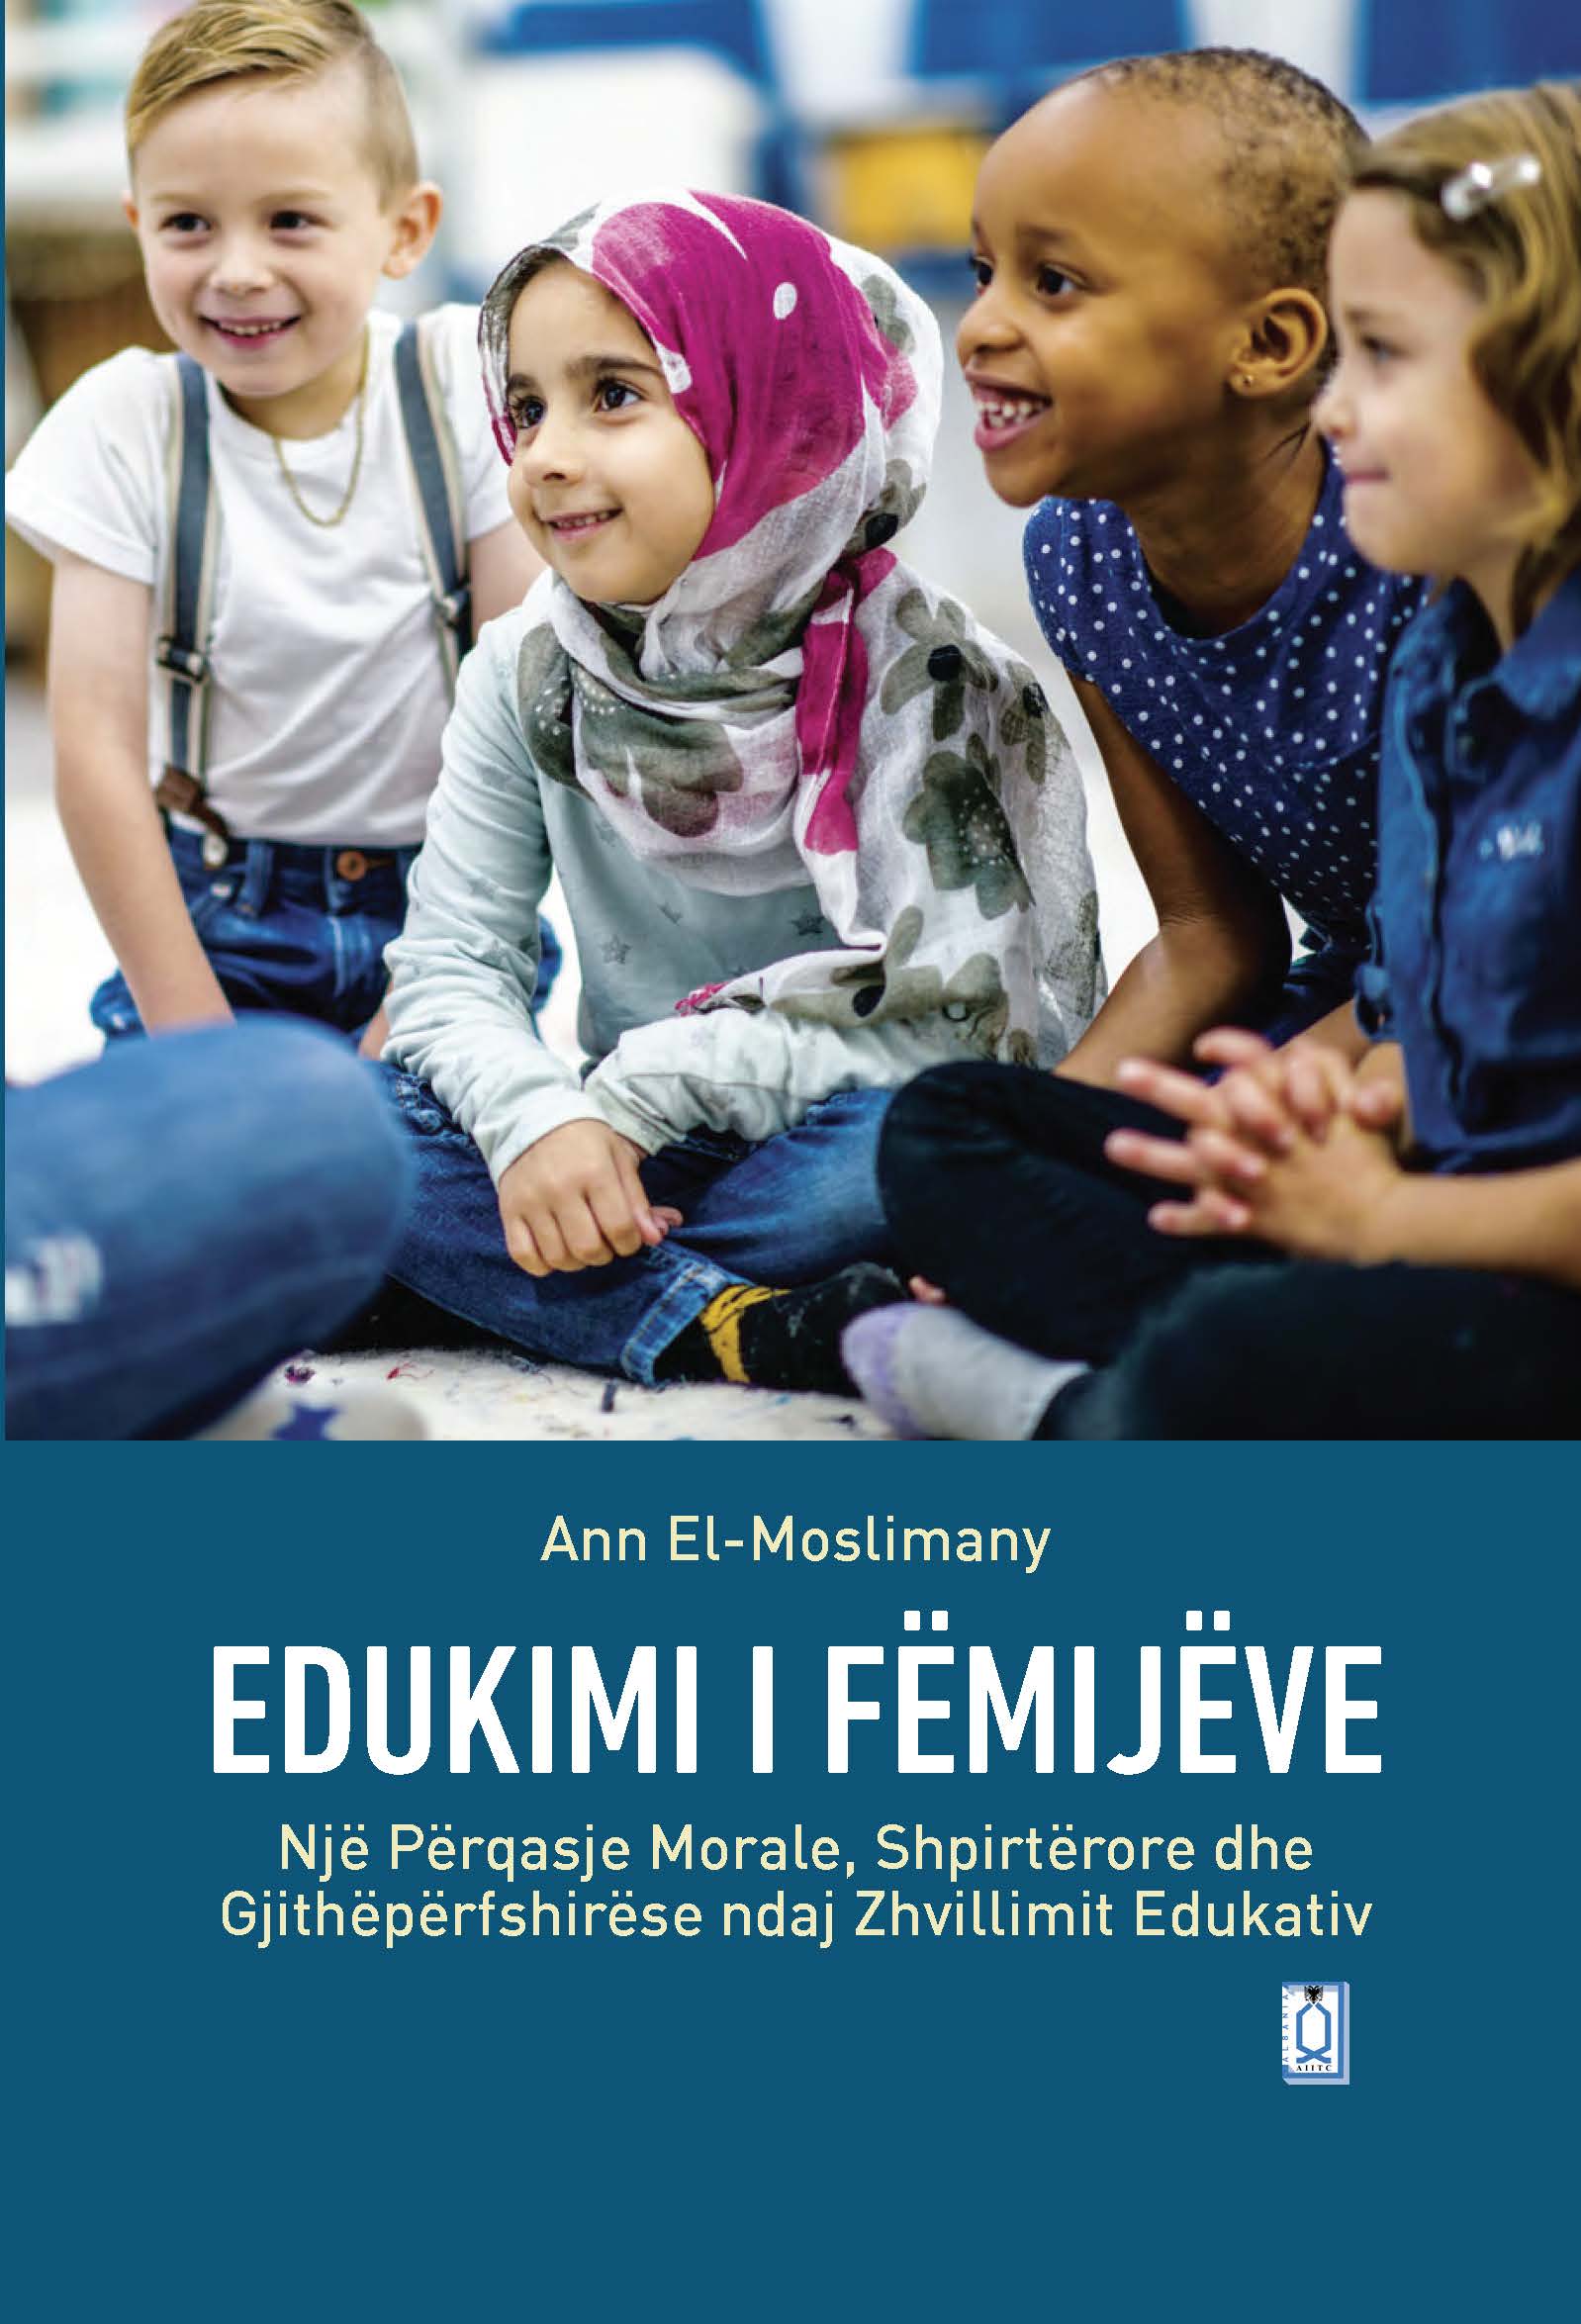 Albanian -Teaching children : A Moral, Spiritual and Holistic Approach to Educational Development Ann El-Moslimany